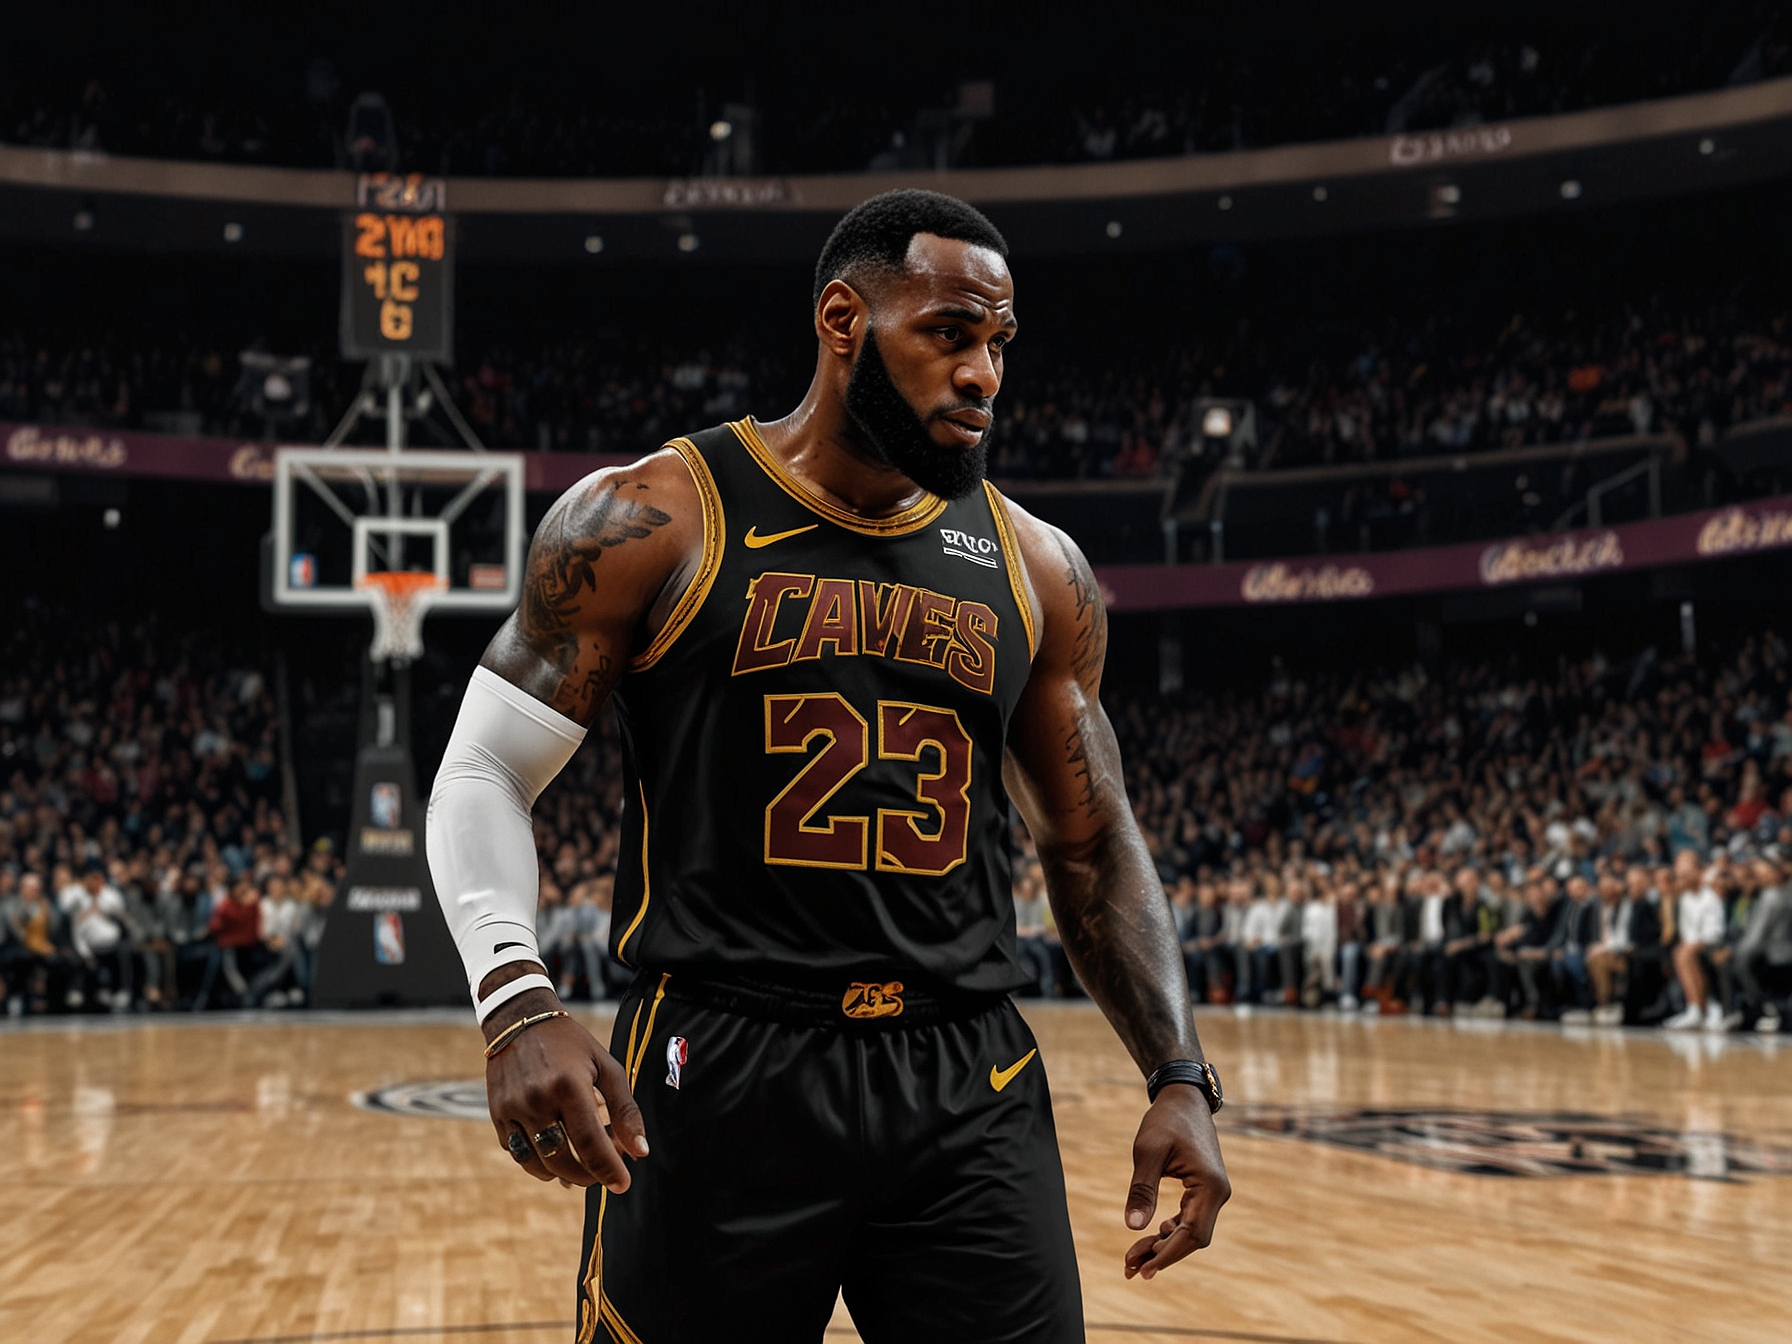 An image of LeBron James and his son Bronny James on the basketball court during an NBA game, illustrating their historic moment of playing together.